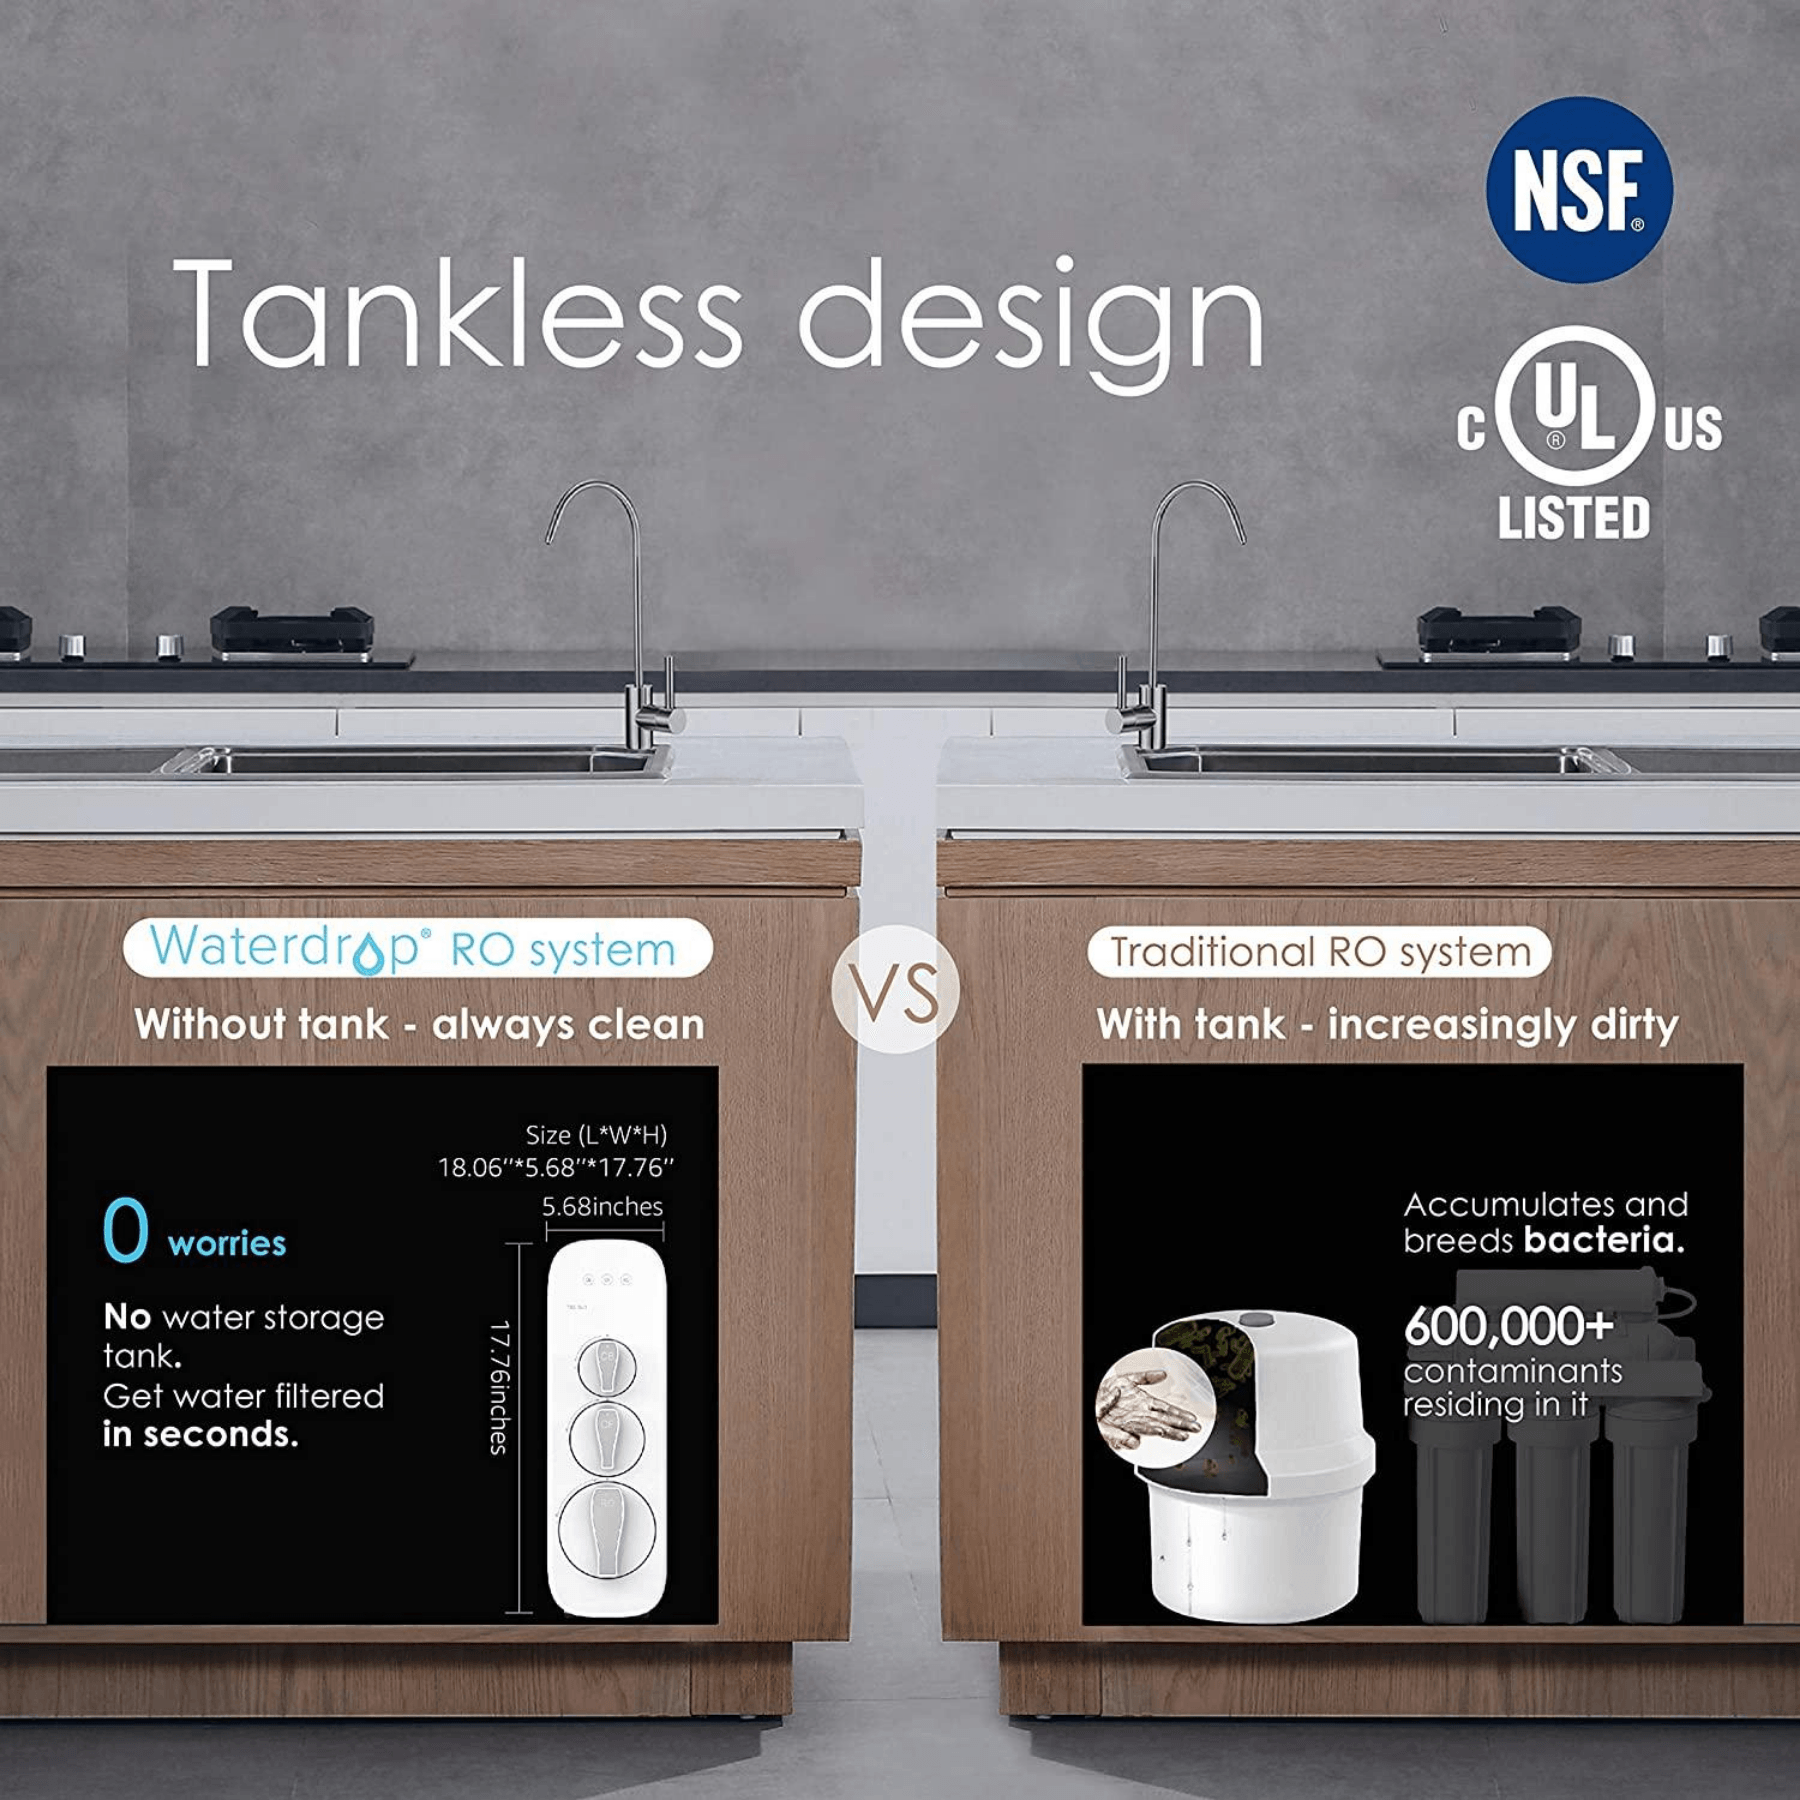 Waterdrop Reverse Osmosis Water Filtration System - G3 RO Tankless Series - WD-G3-W